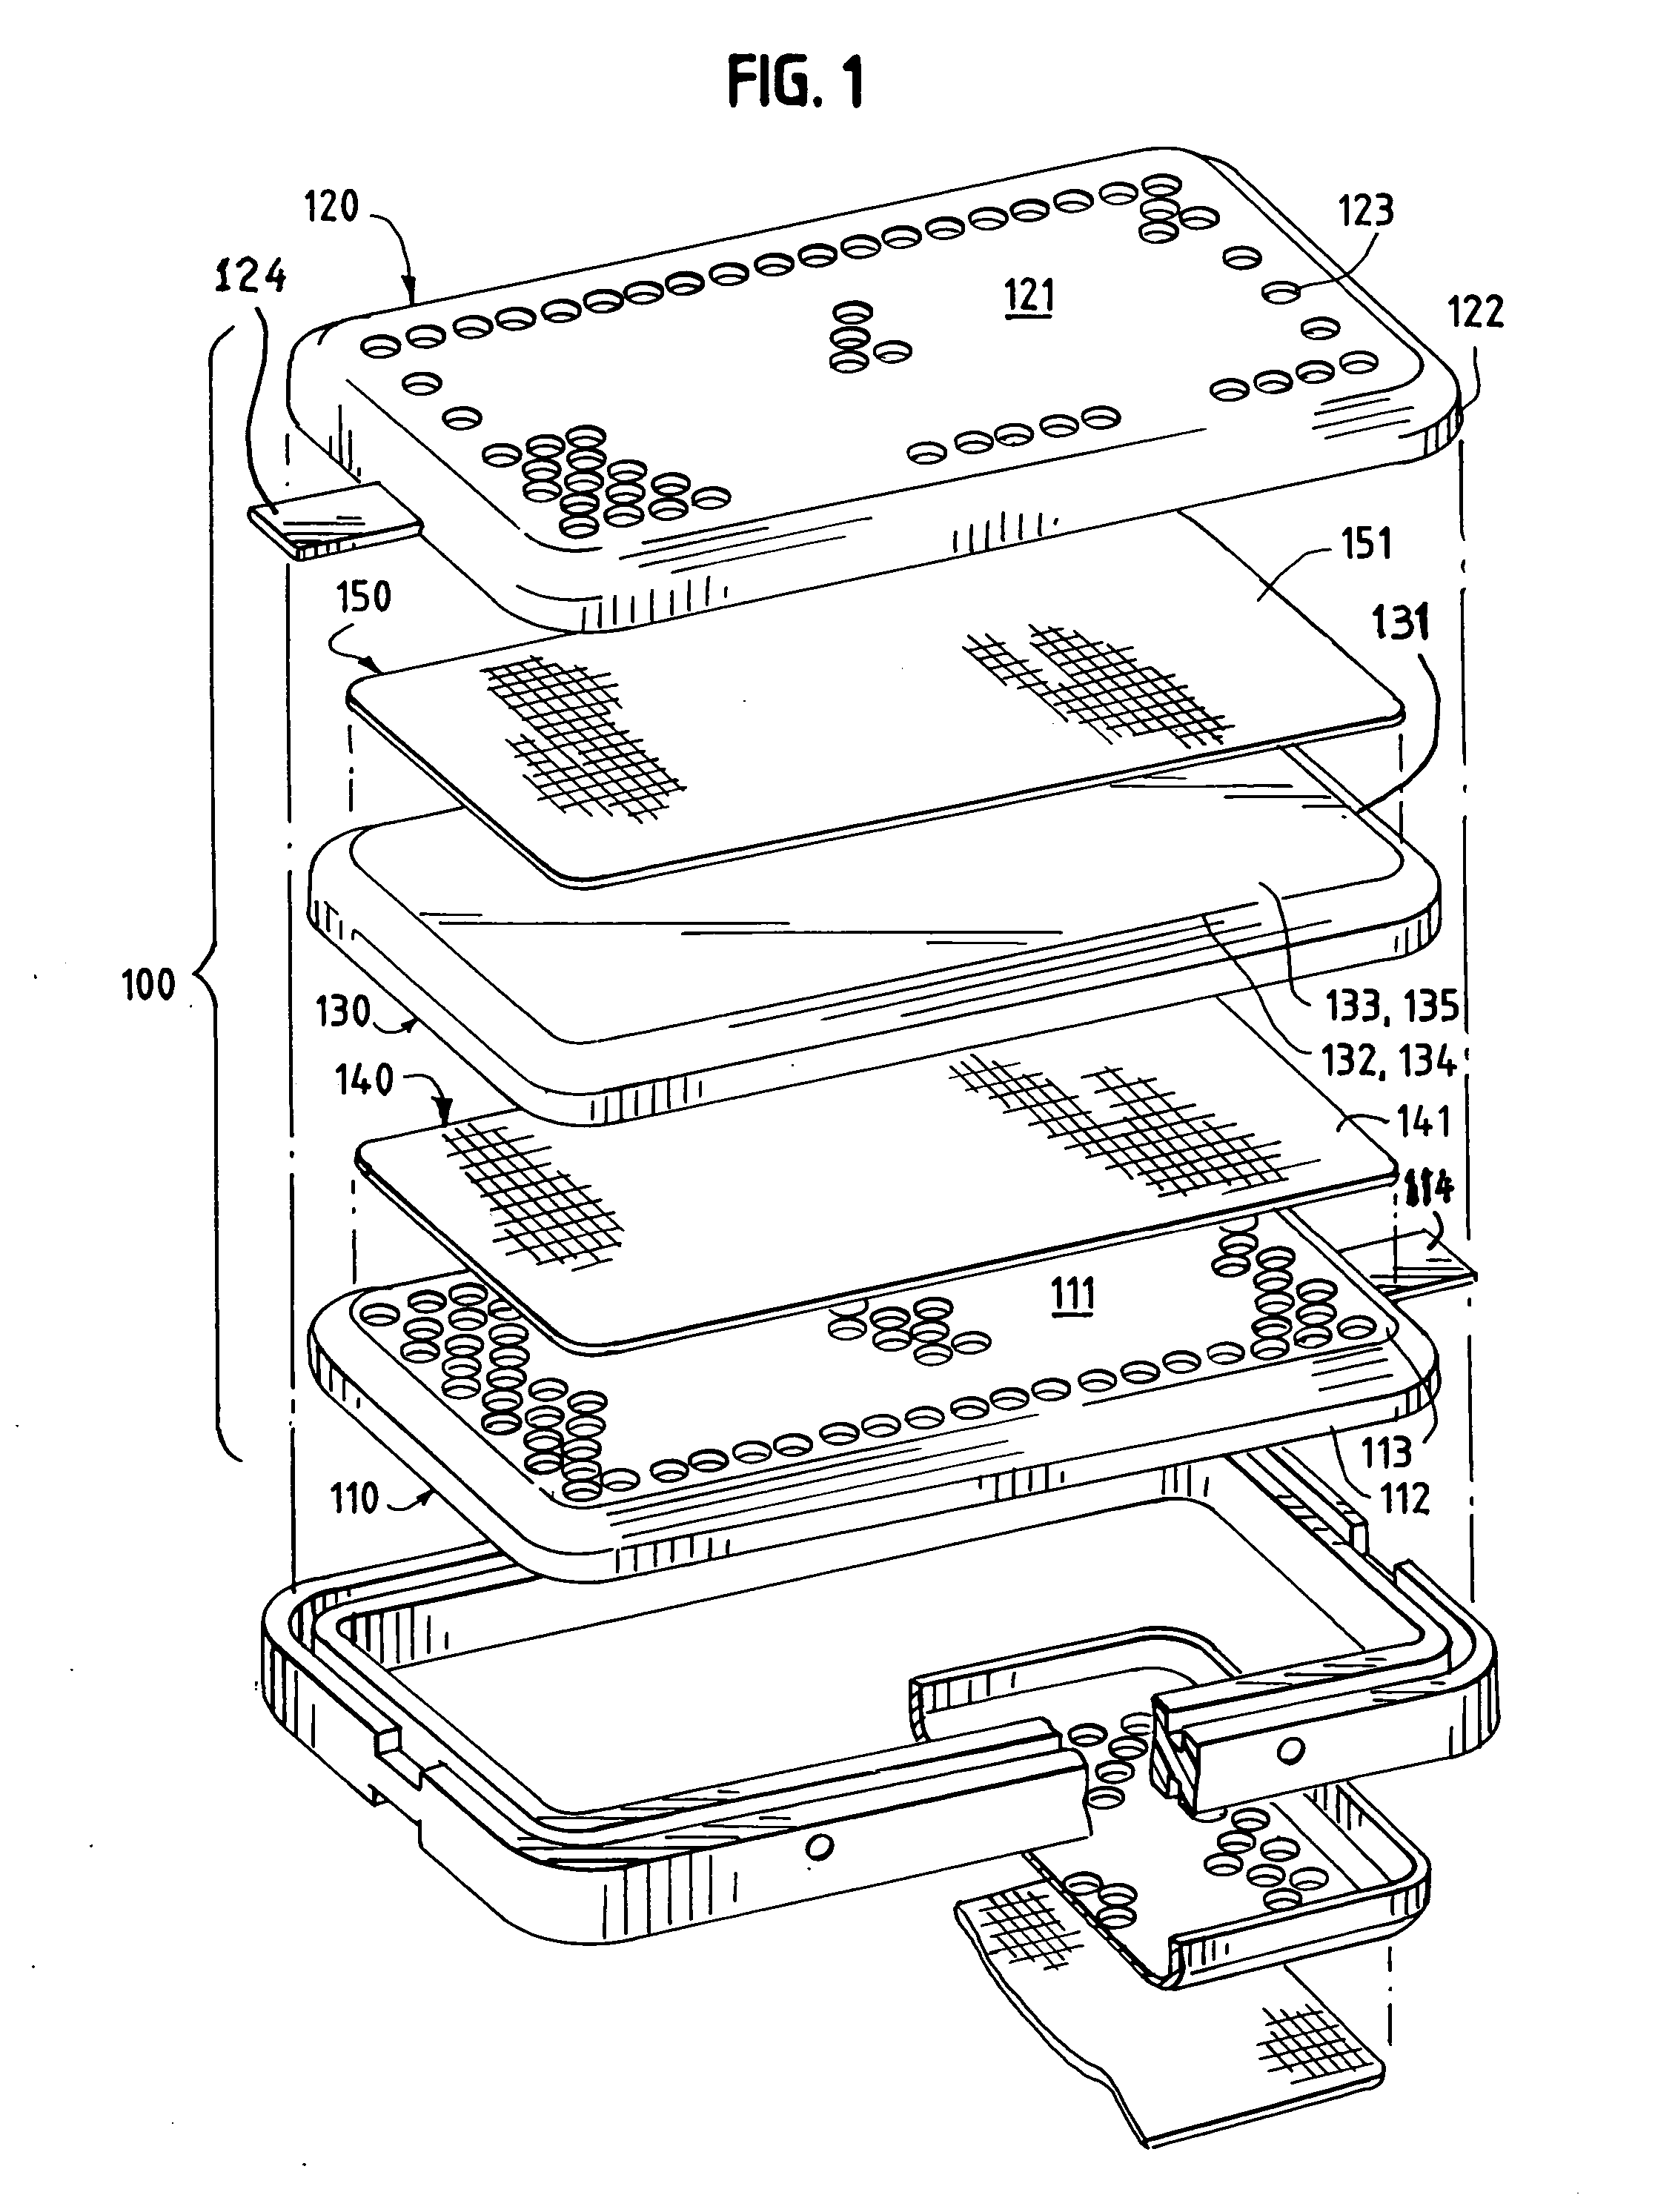 Liquid feed fuel cell with nested sealing configuration